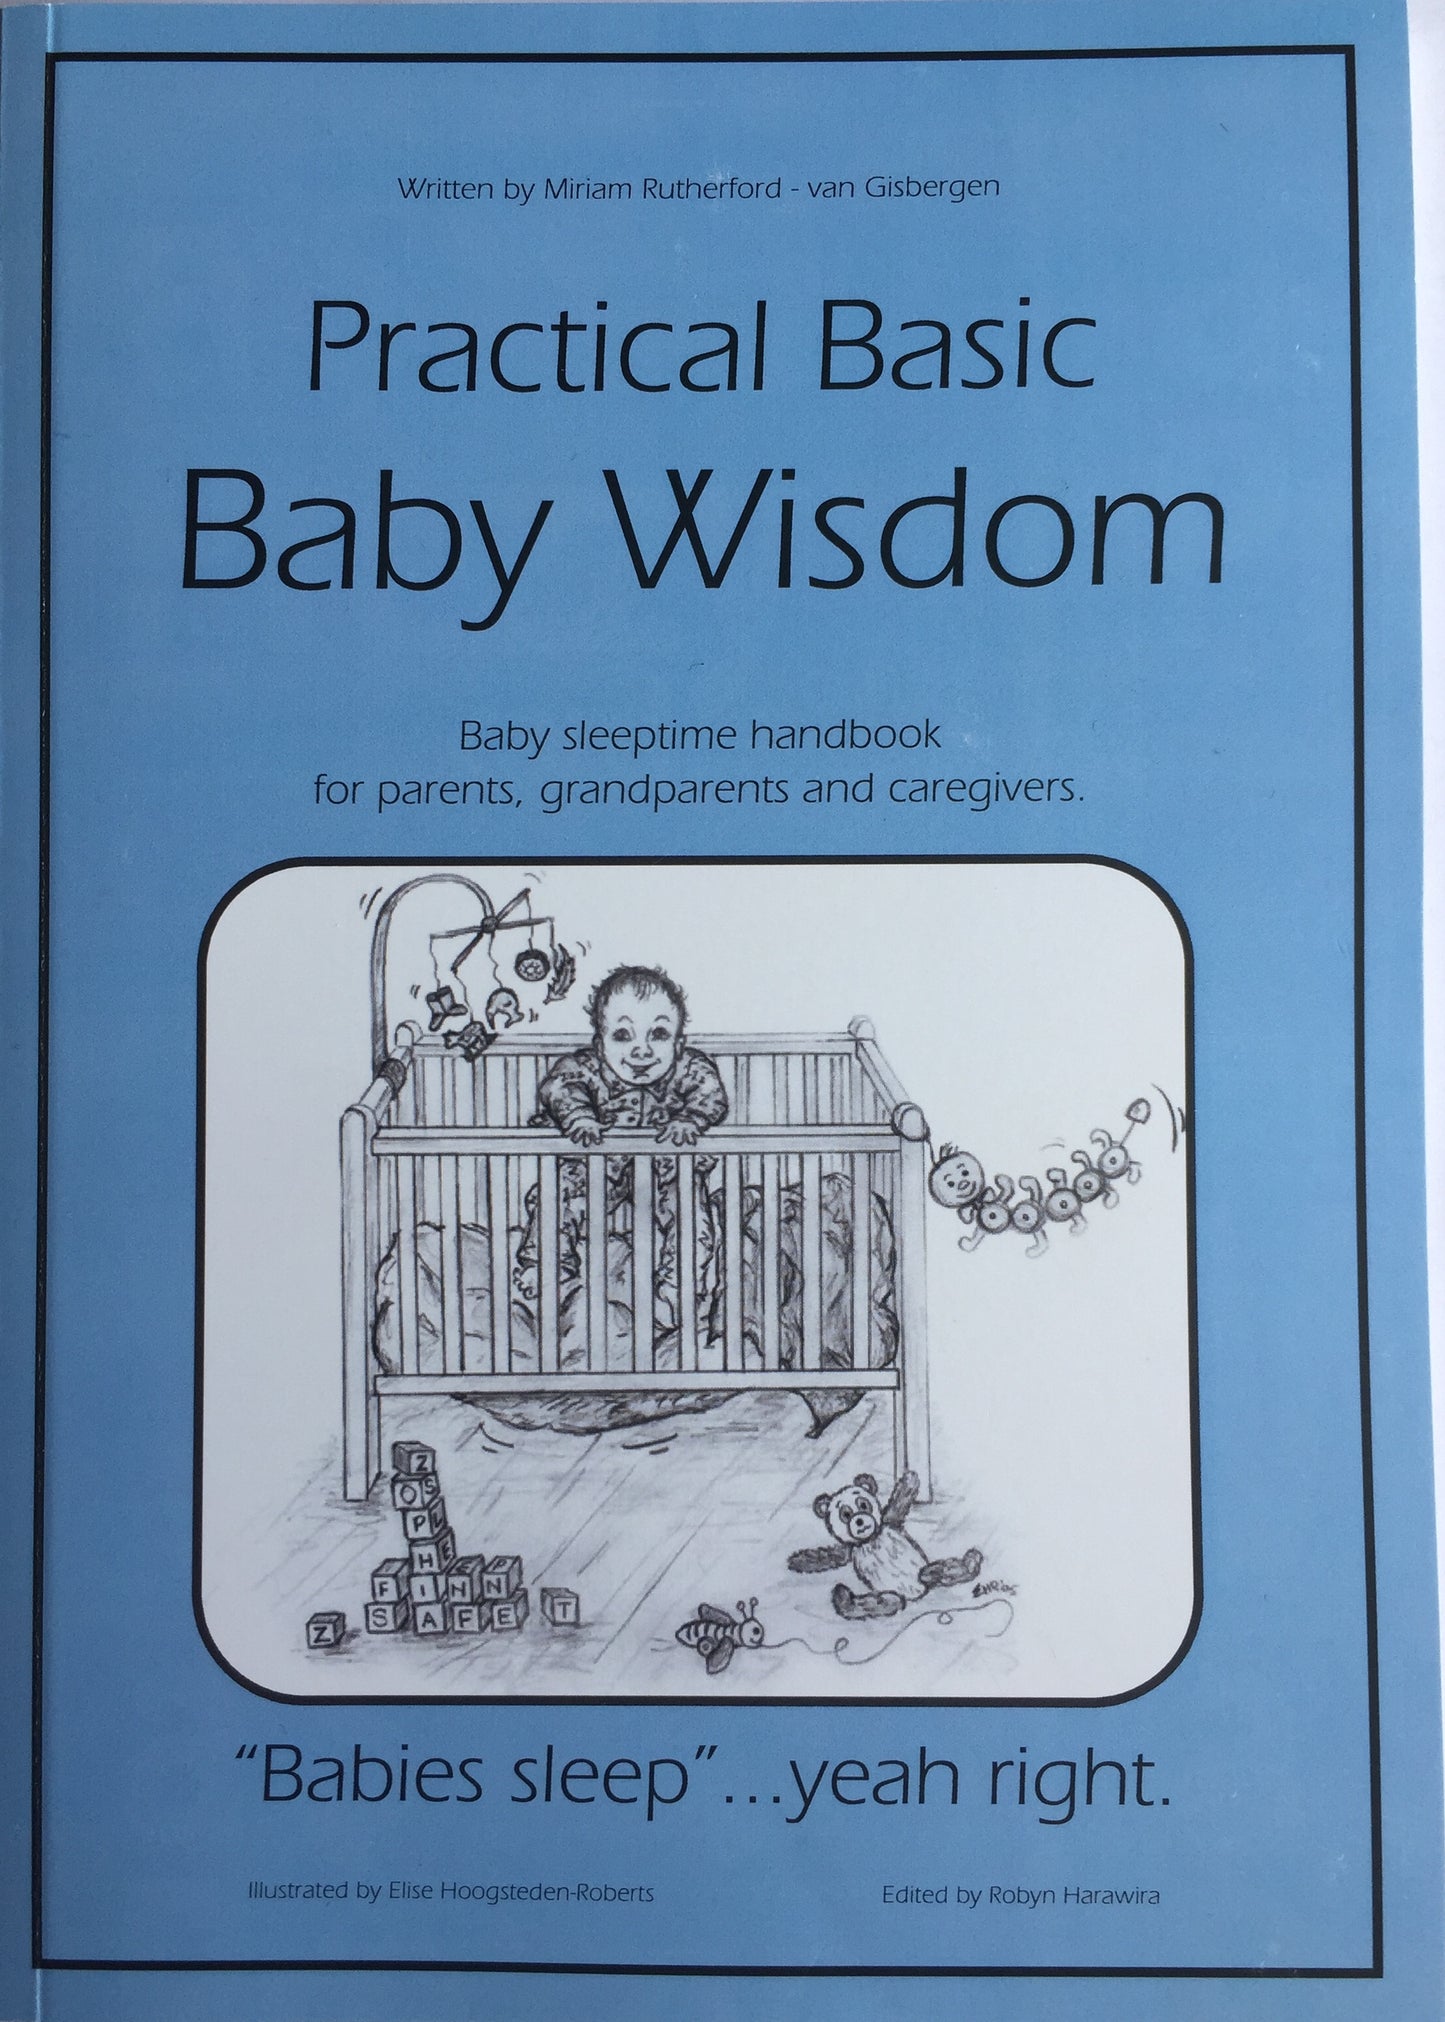 Safe T Sleep® | Baby Wisdom Book. Baby sleep guide for new parents or caregivers